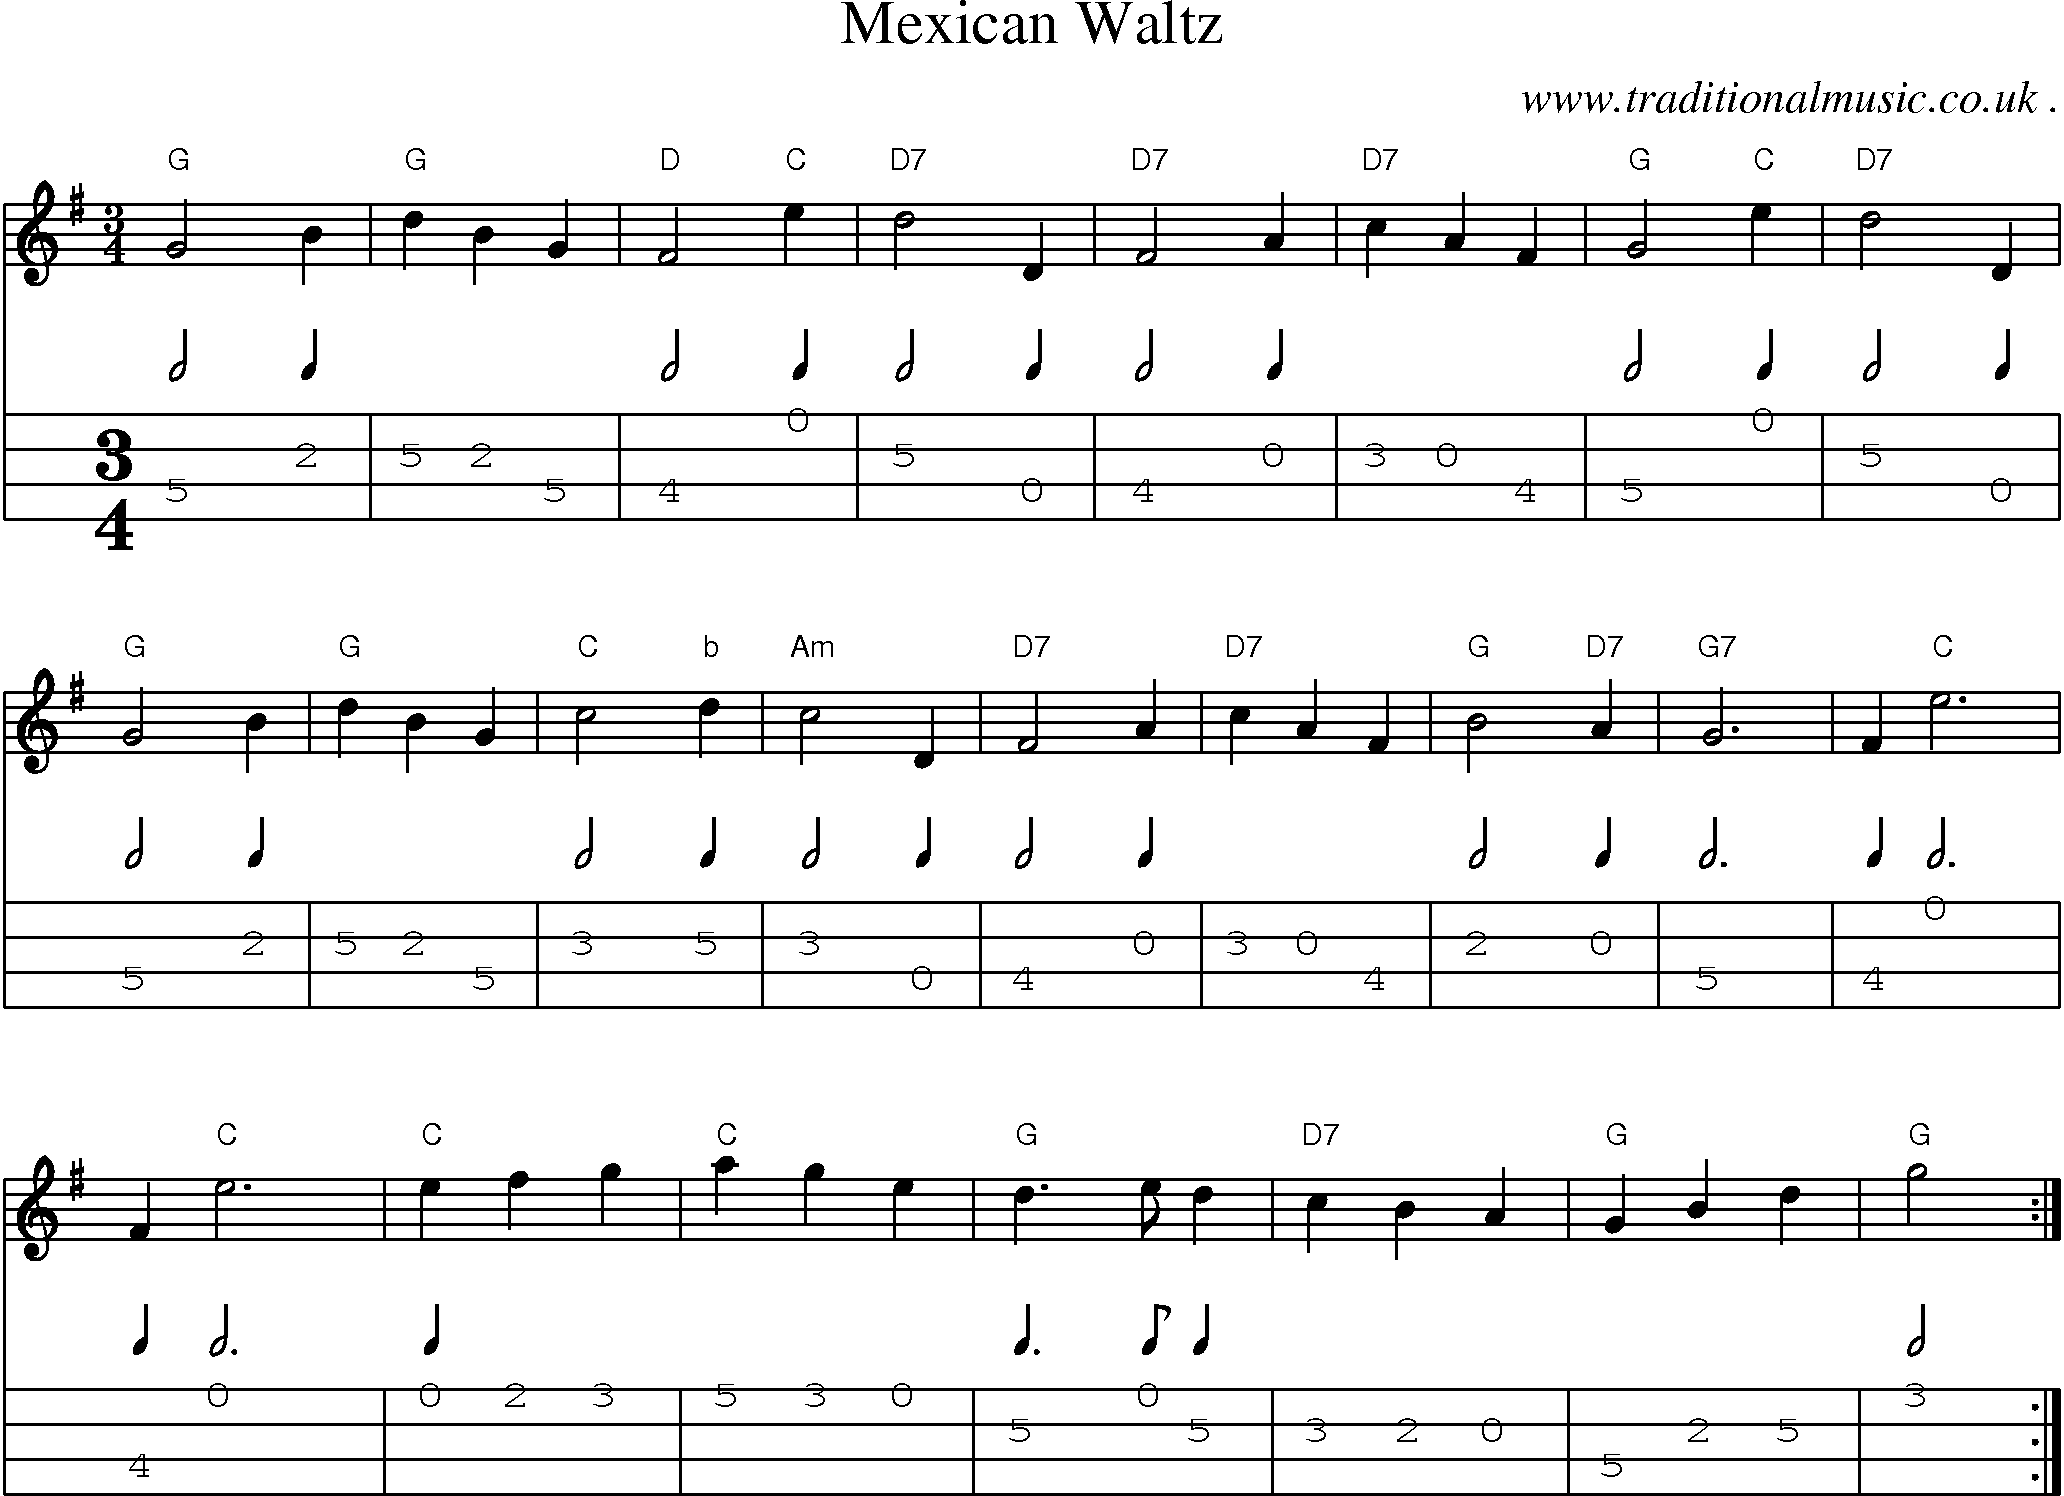 Music Score and Guitar Tabs for Mexican Waltz